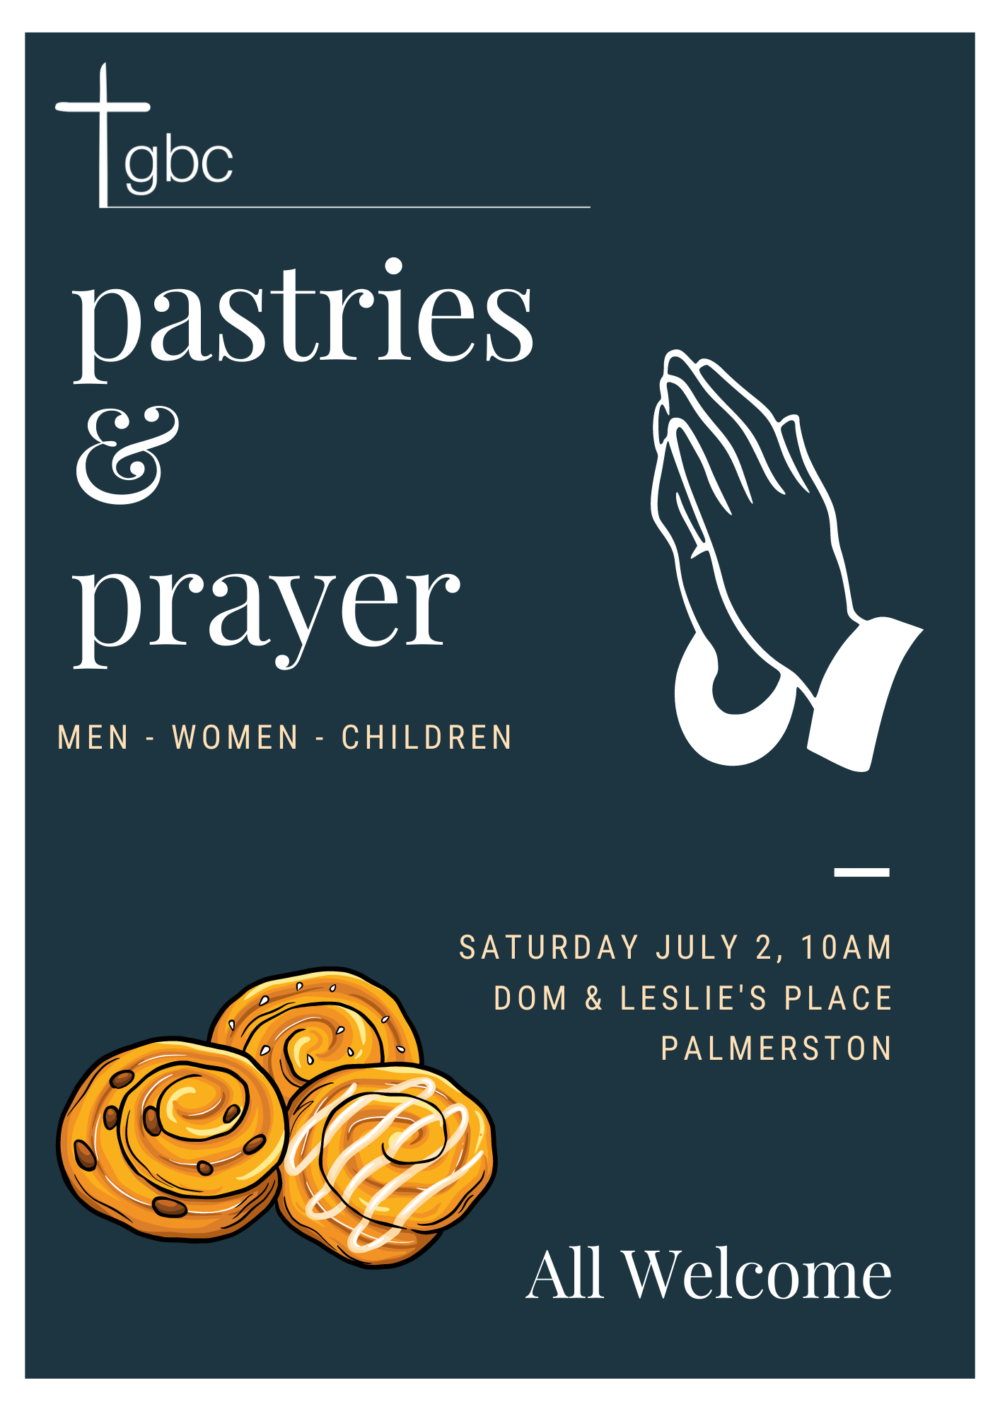 Pastries and prayer morning